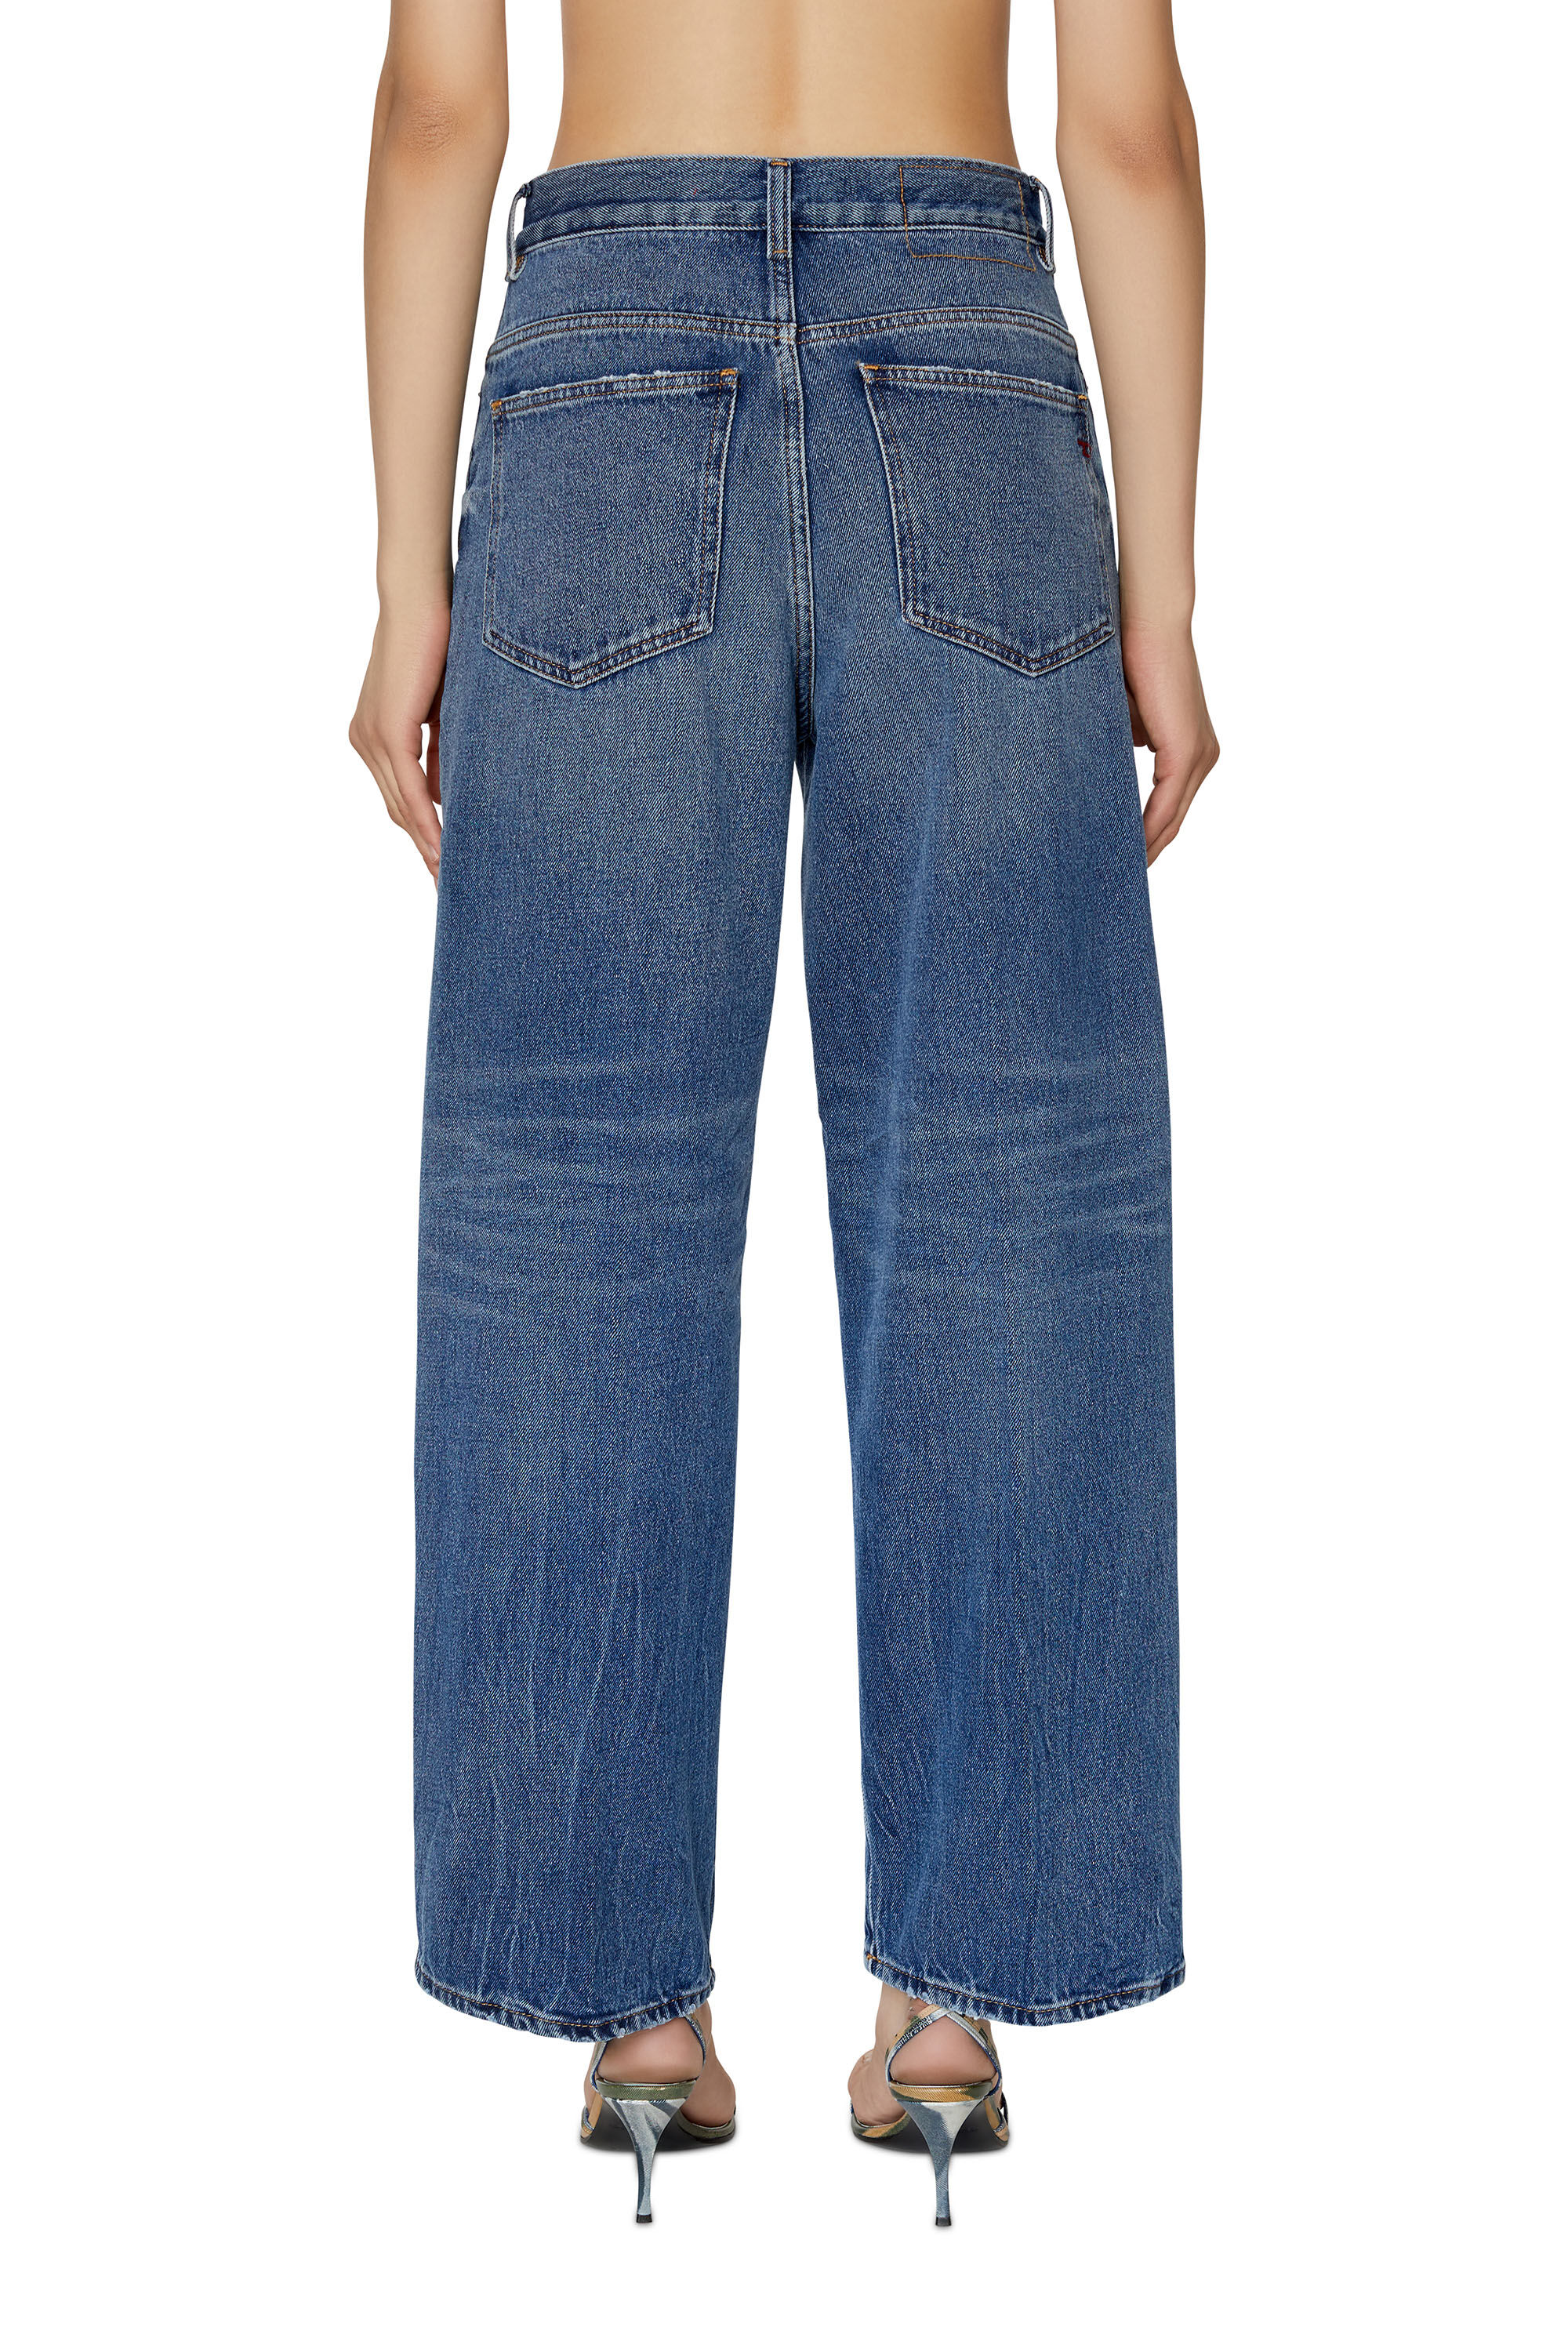 Women's Bootcut and Flare Jeans | Medium blue | Diesel 2000 Widee